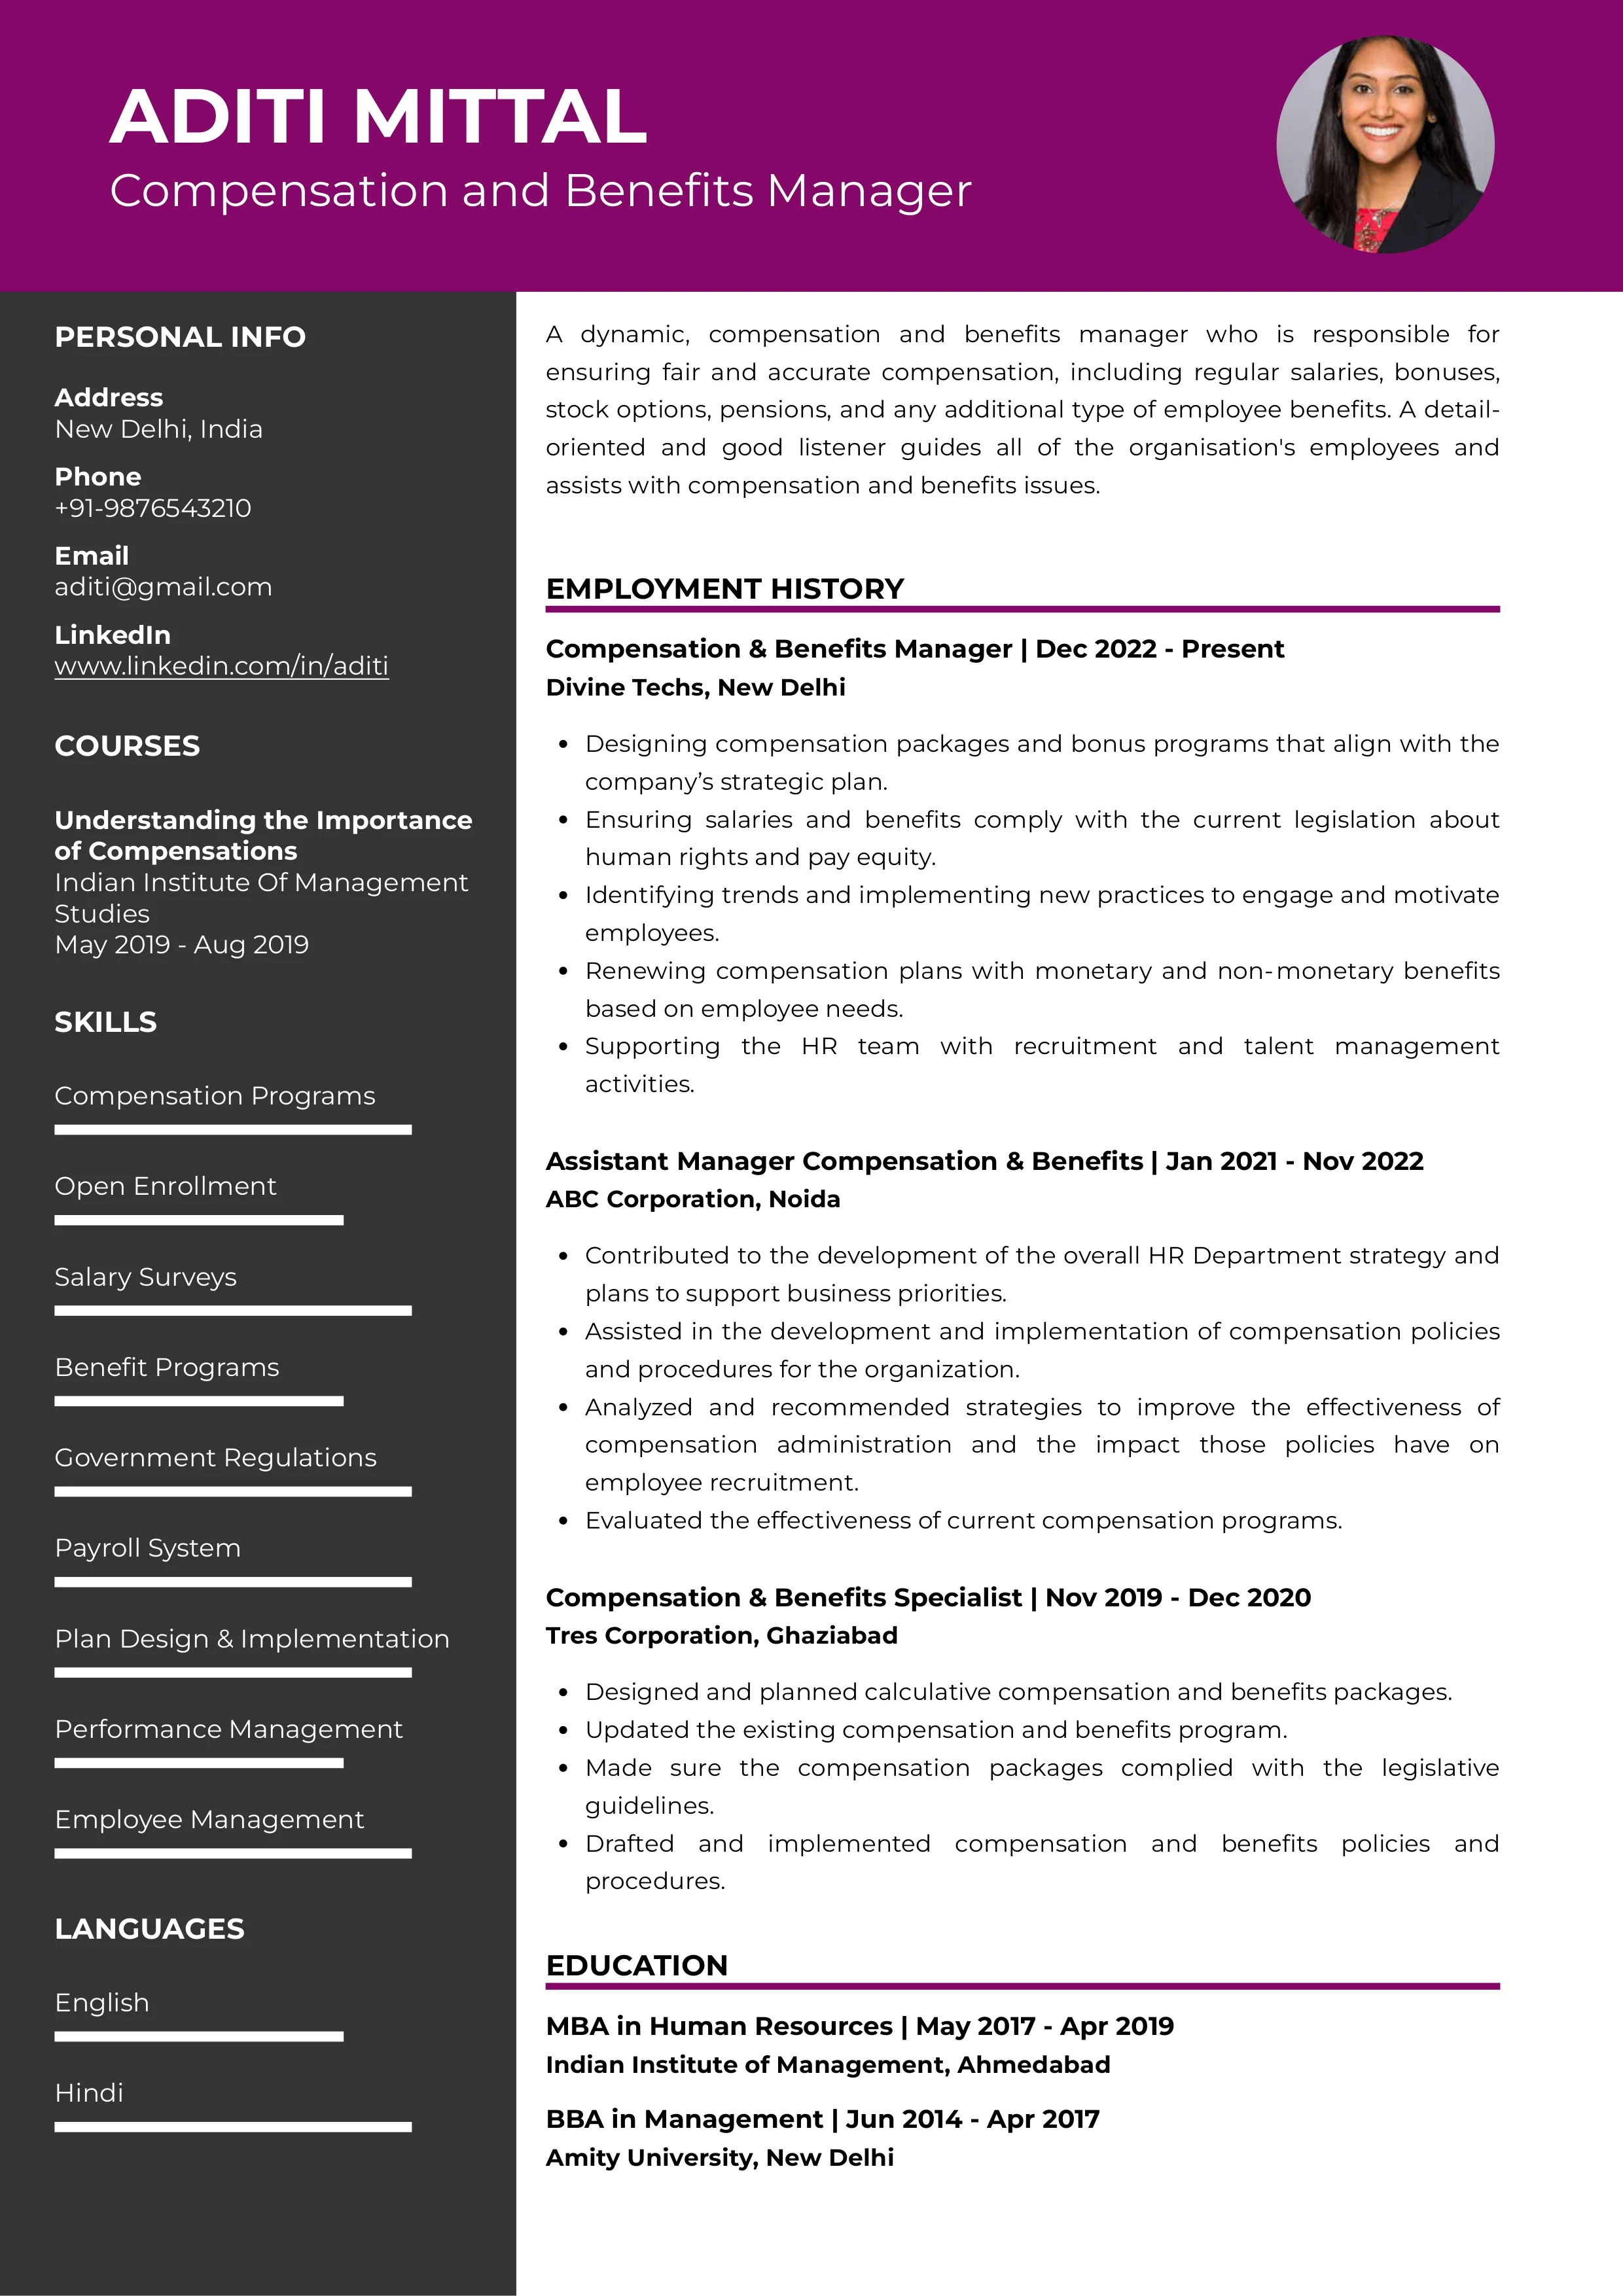 Sample Resume of Compensation and Benefits Manager | Free Resume Templates & Samples on Resumod.co